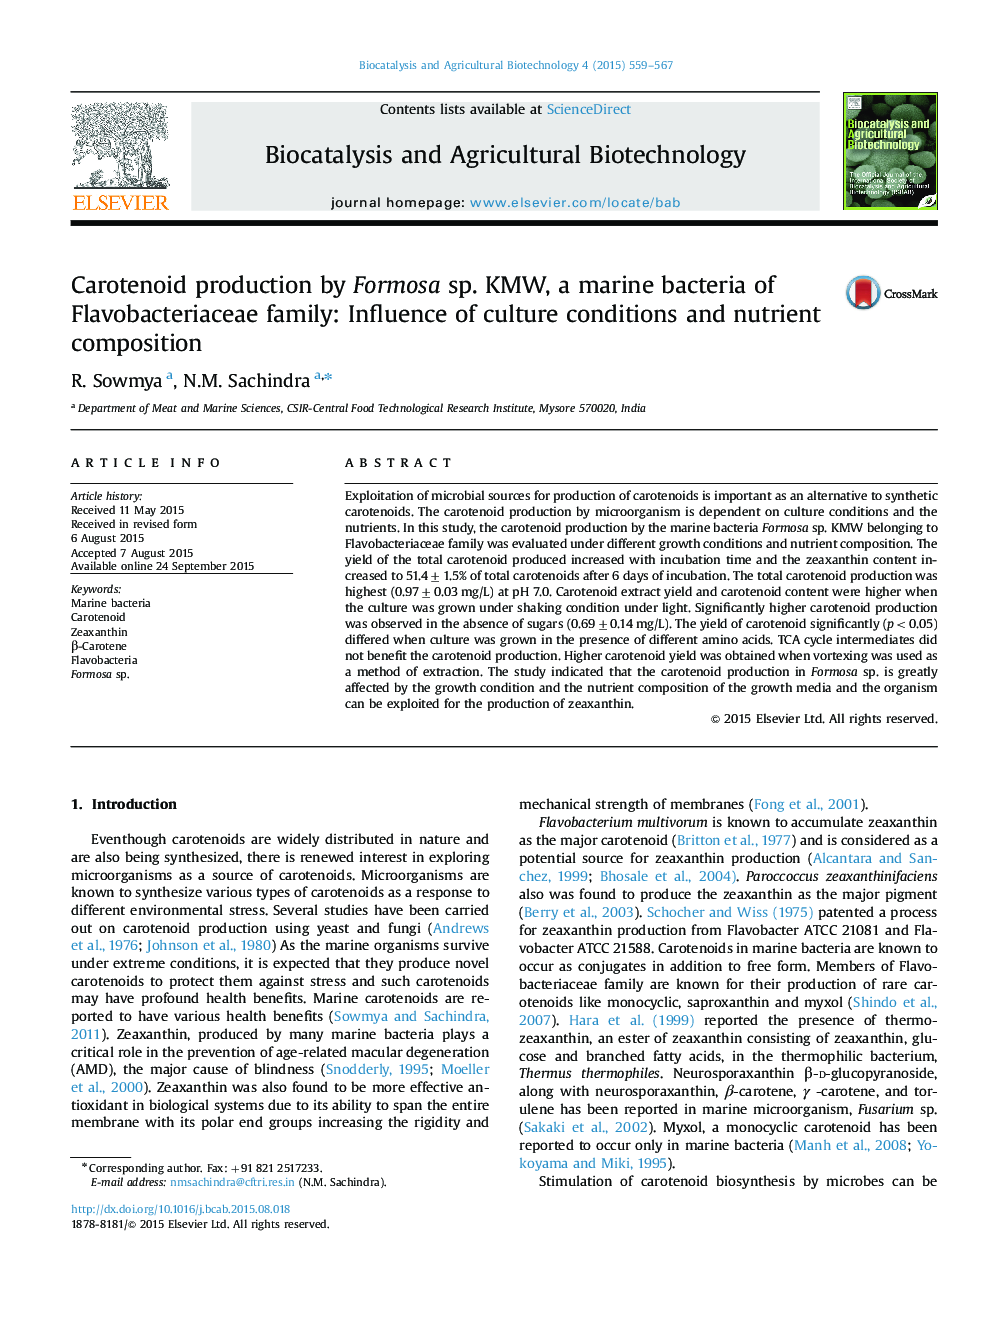 Carotenoid production by Formosa sp. KMW, a marine bacteria of Flavobacteriaceae family: Influence of culture conditions and nutrient composition